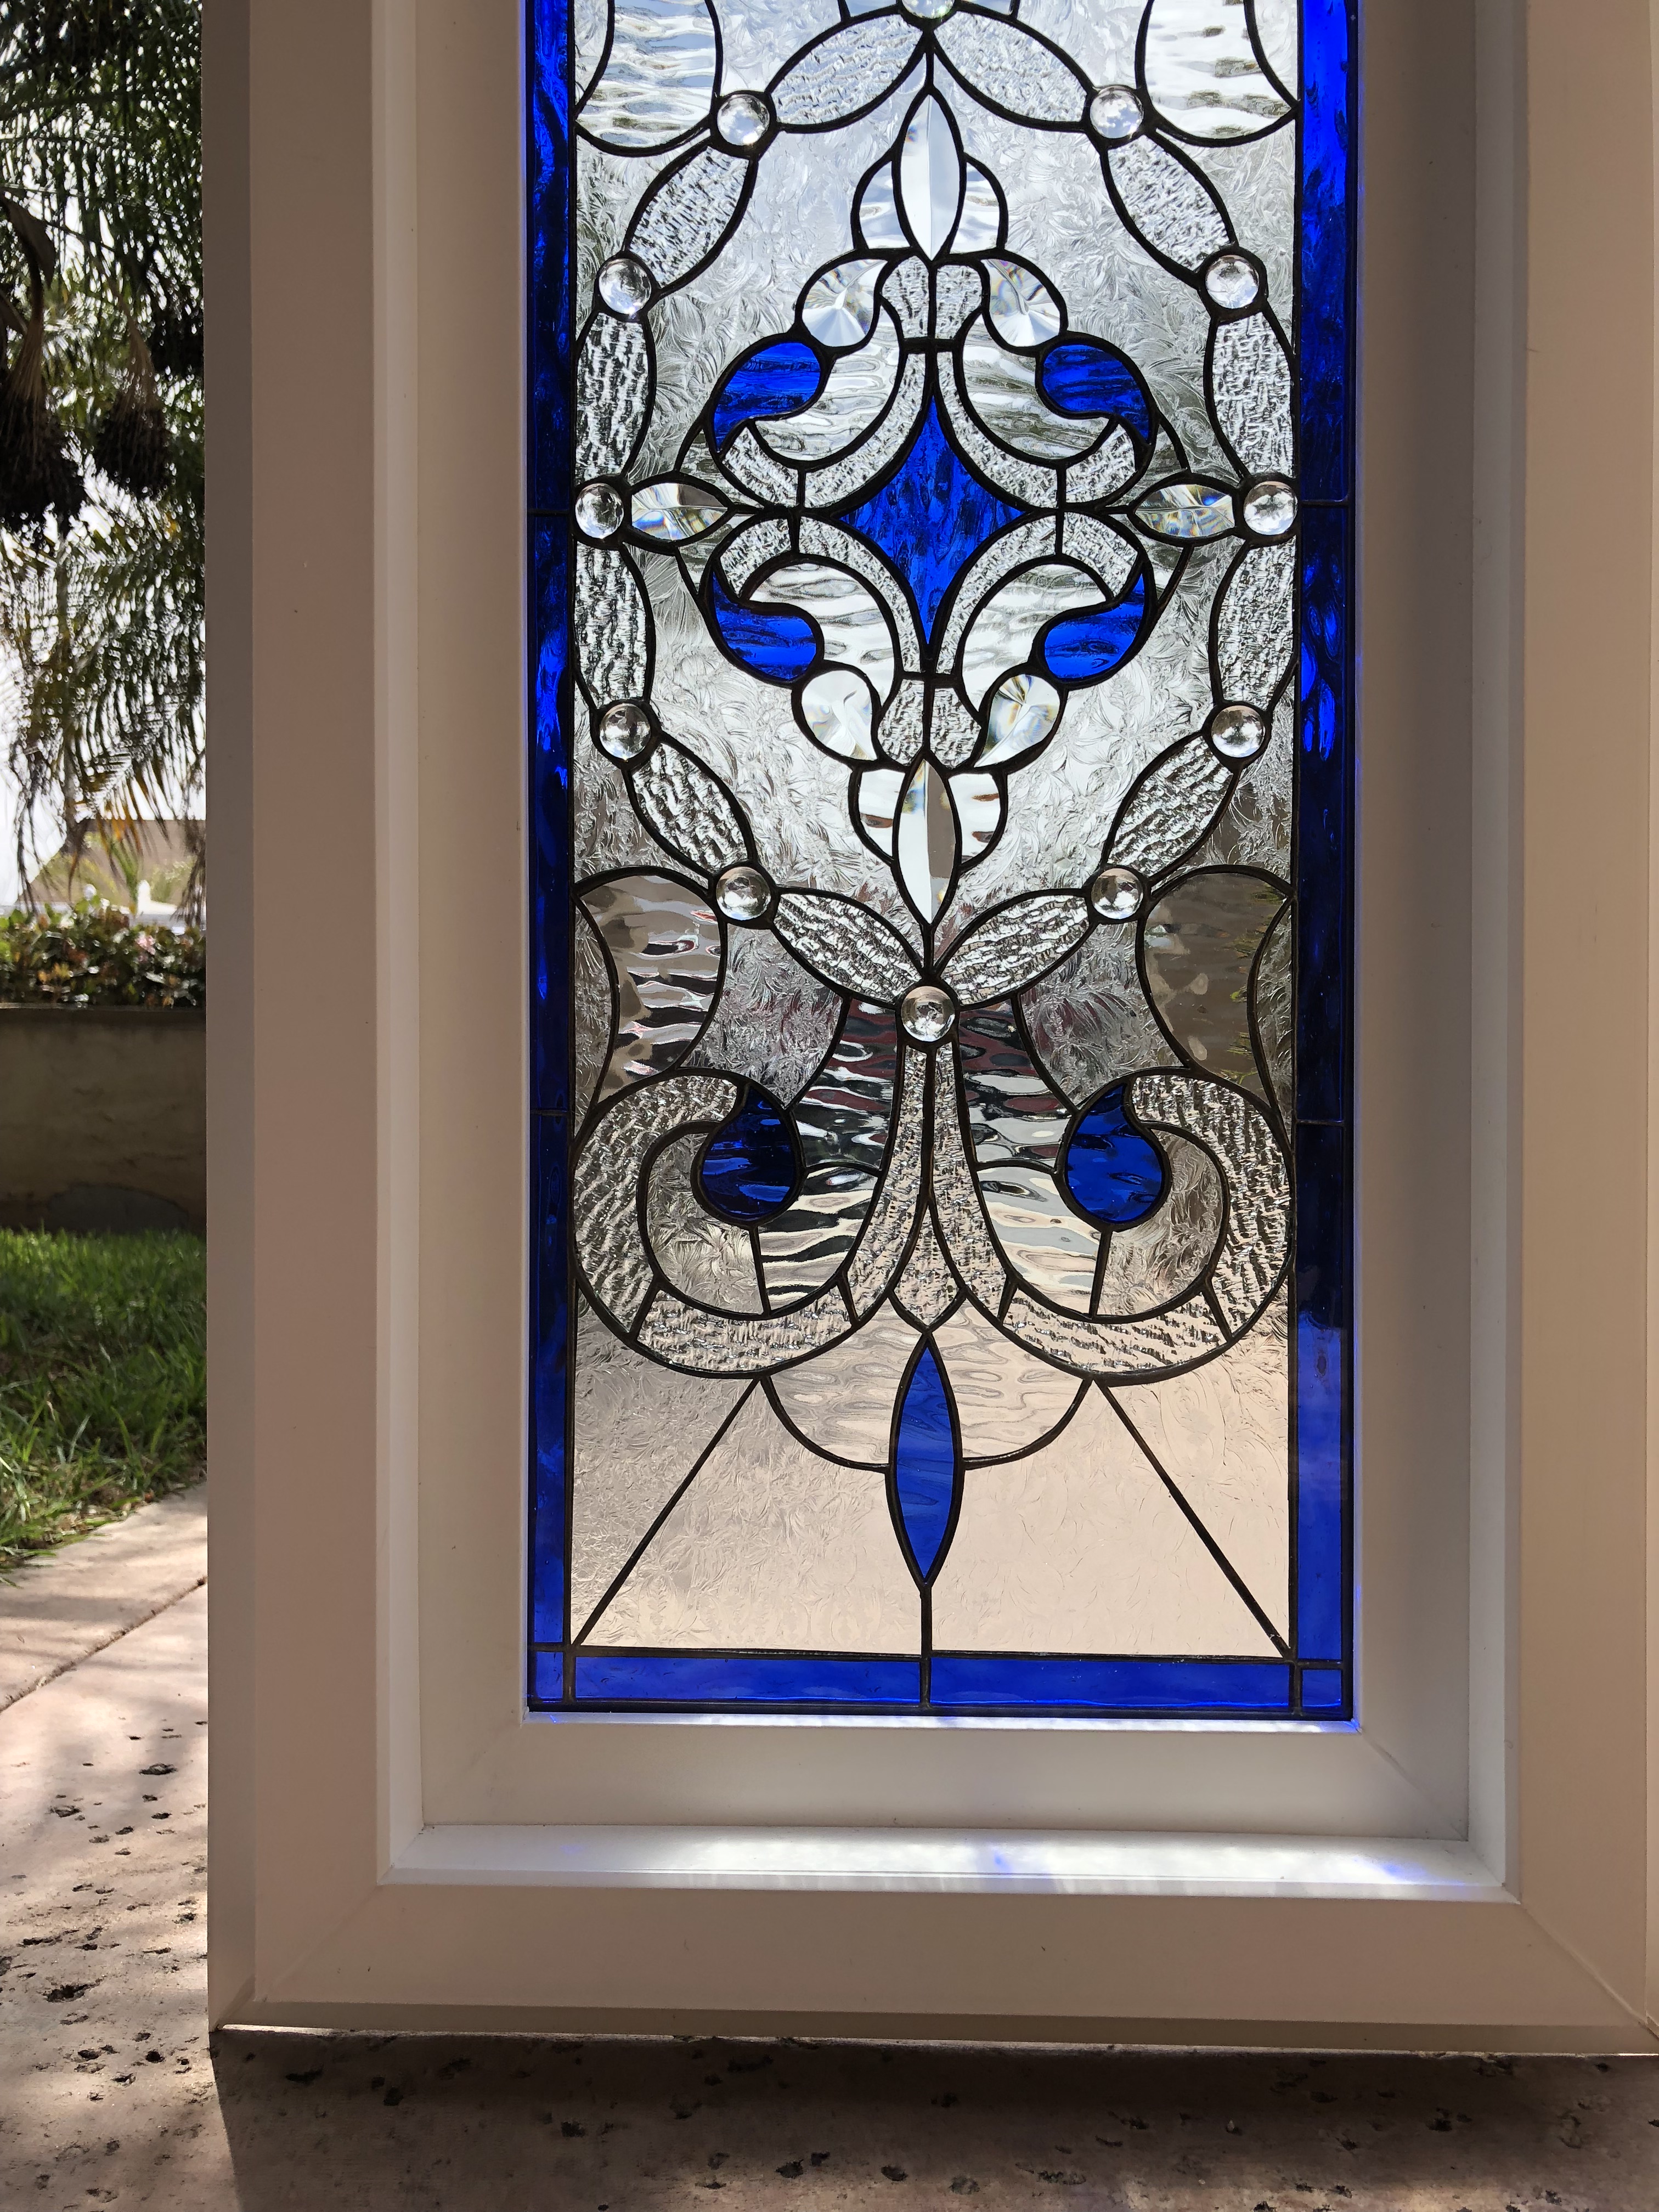 Simply Stunning! The “Victorville” Stained and Beveled Glass Window In